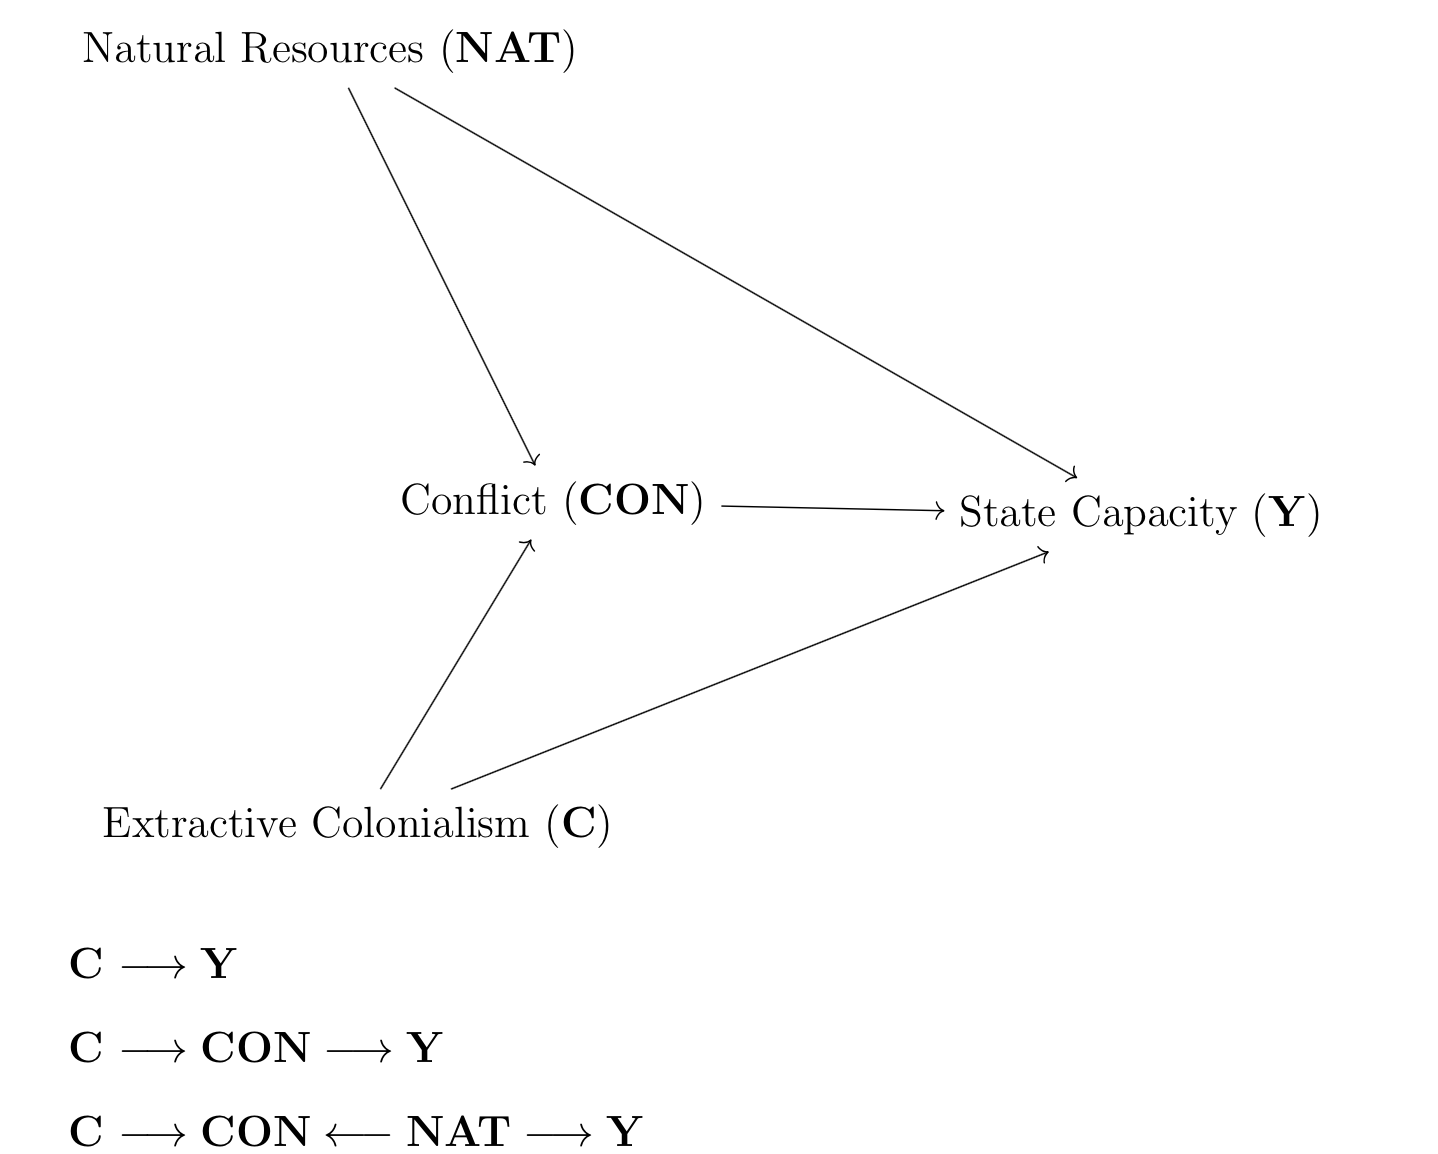 DAGs, Regression Discontinuity and Instrumental Variables